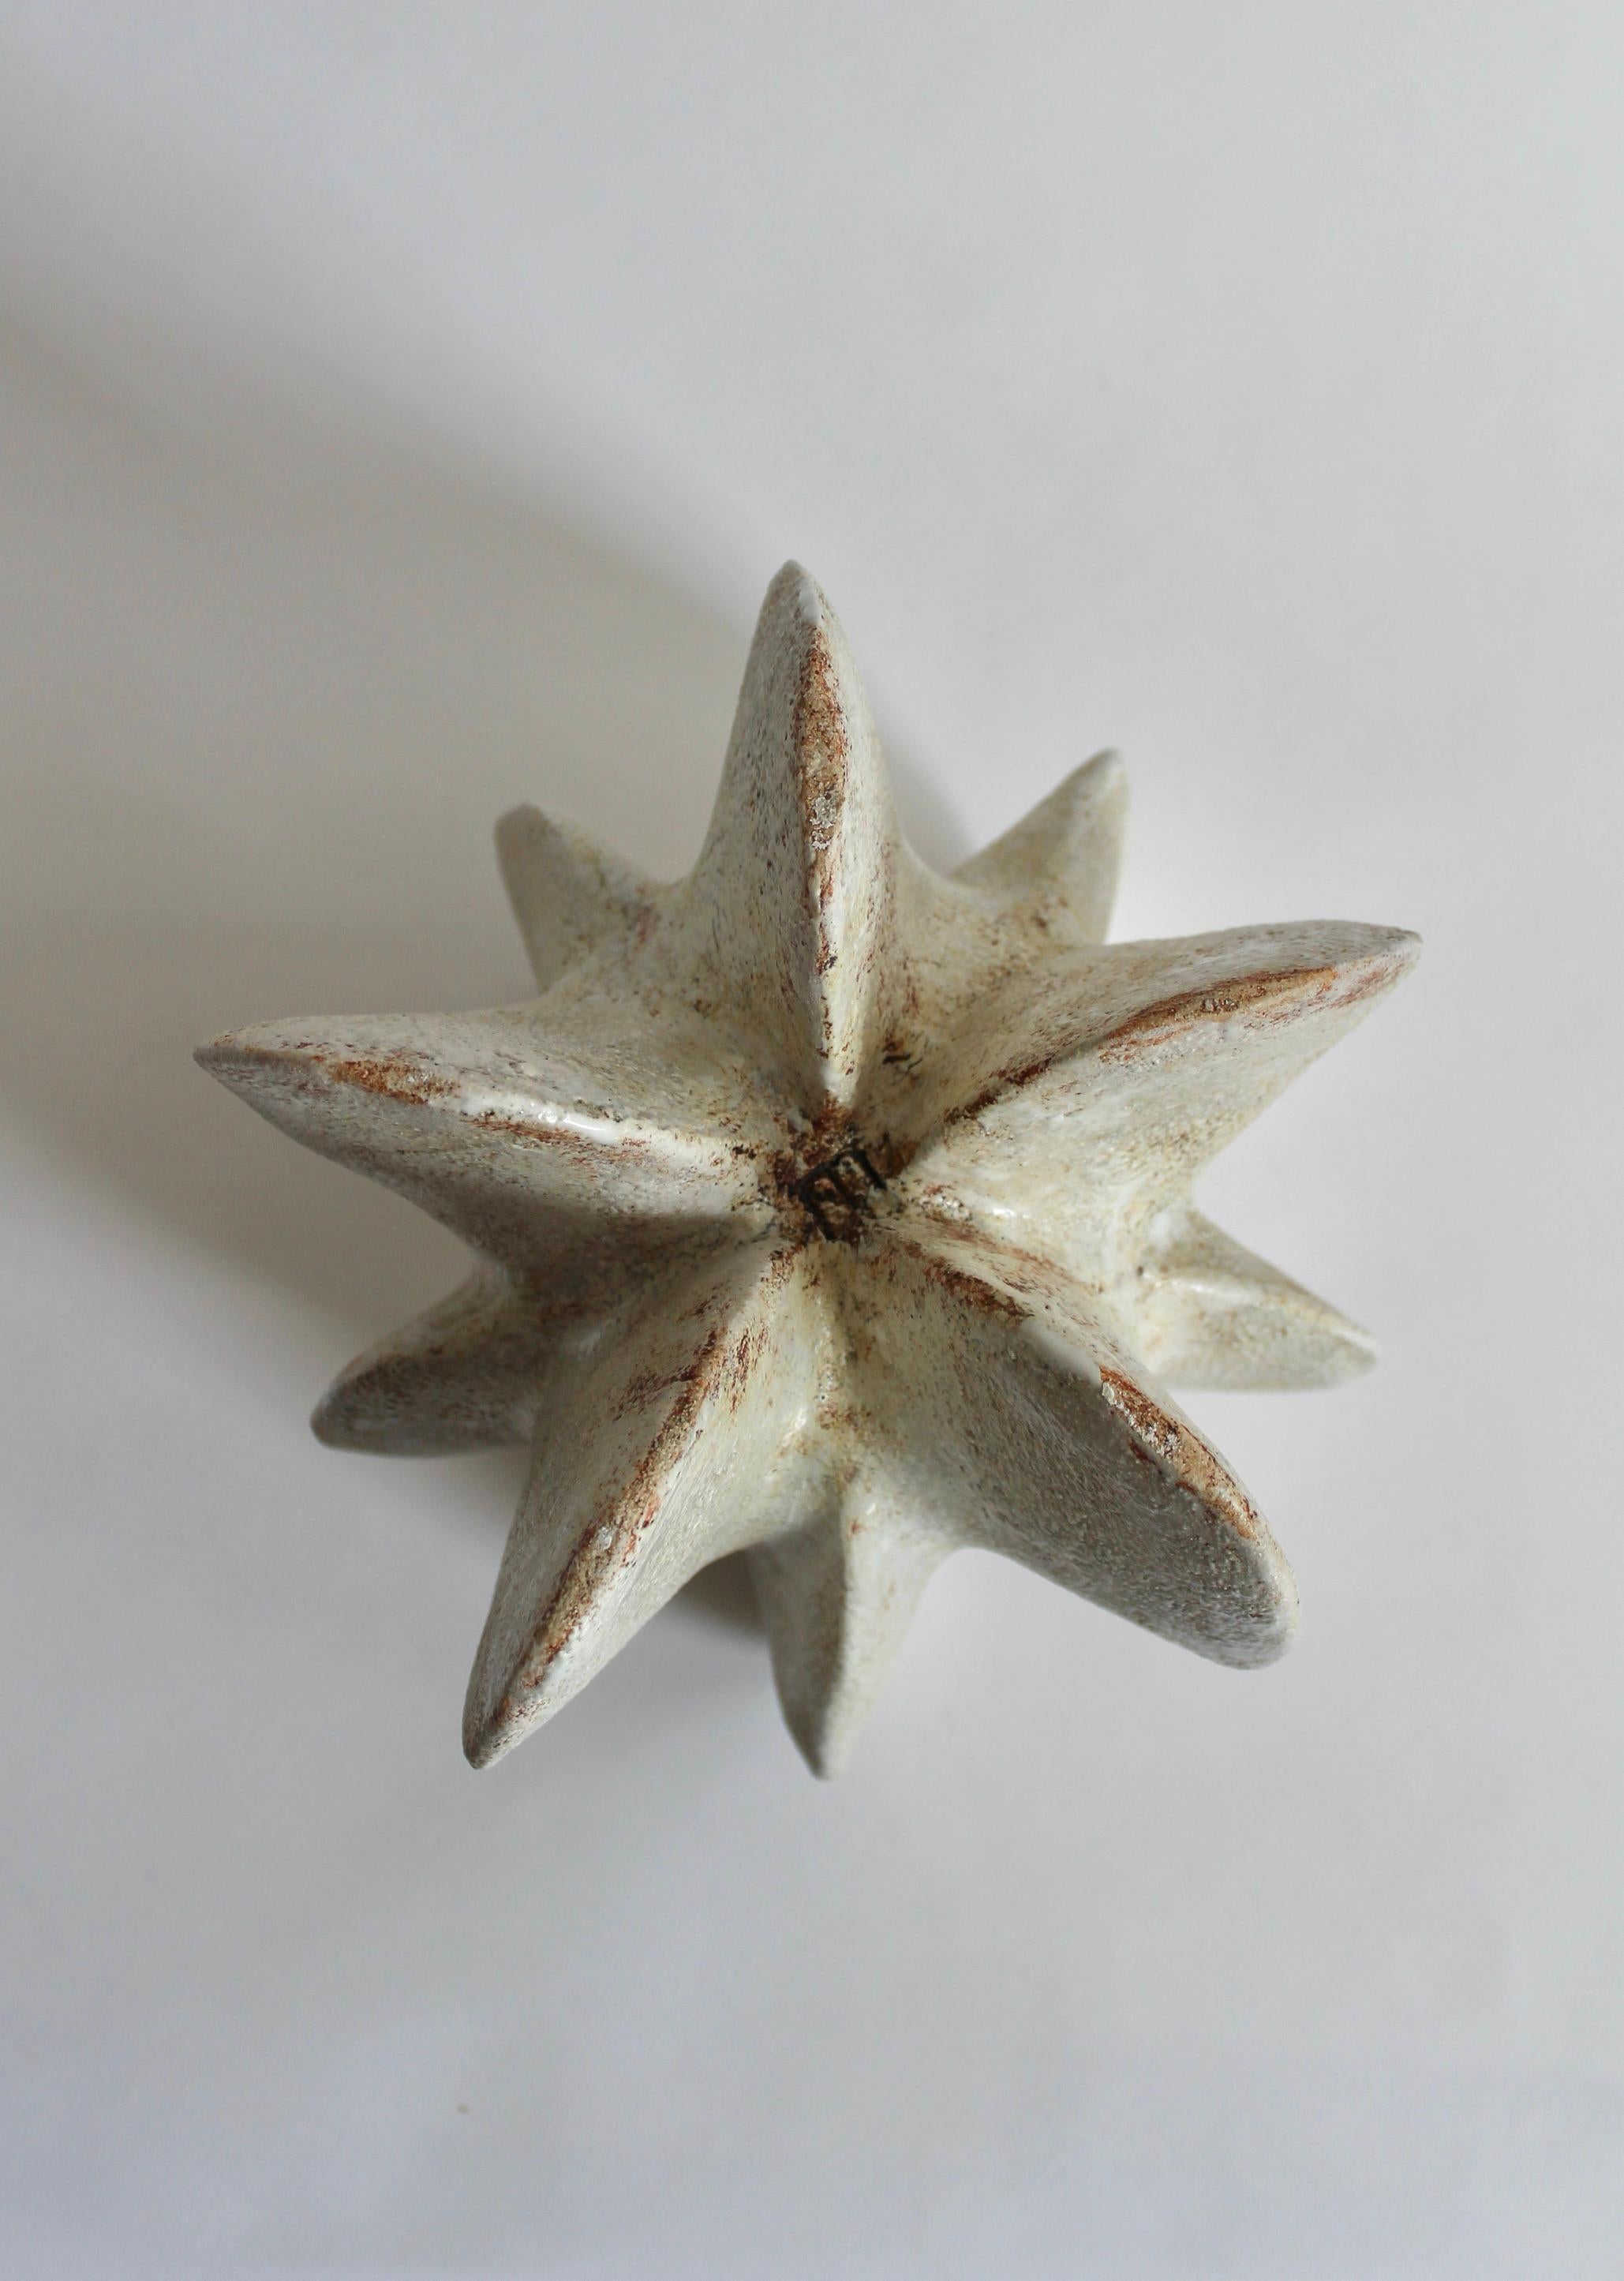 Star petal gourd III by Julie Nelson
One Of A Kind
Dimensions: D 22 x H 26.5 cm
Materials: Ceramic stoneware and porcelain

Artist Julie Nelson uses the materiality of clay as a means to explore naturally occurring patterns and